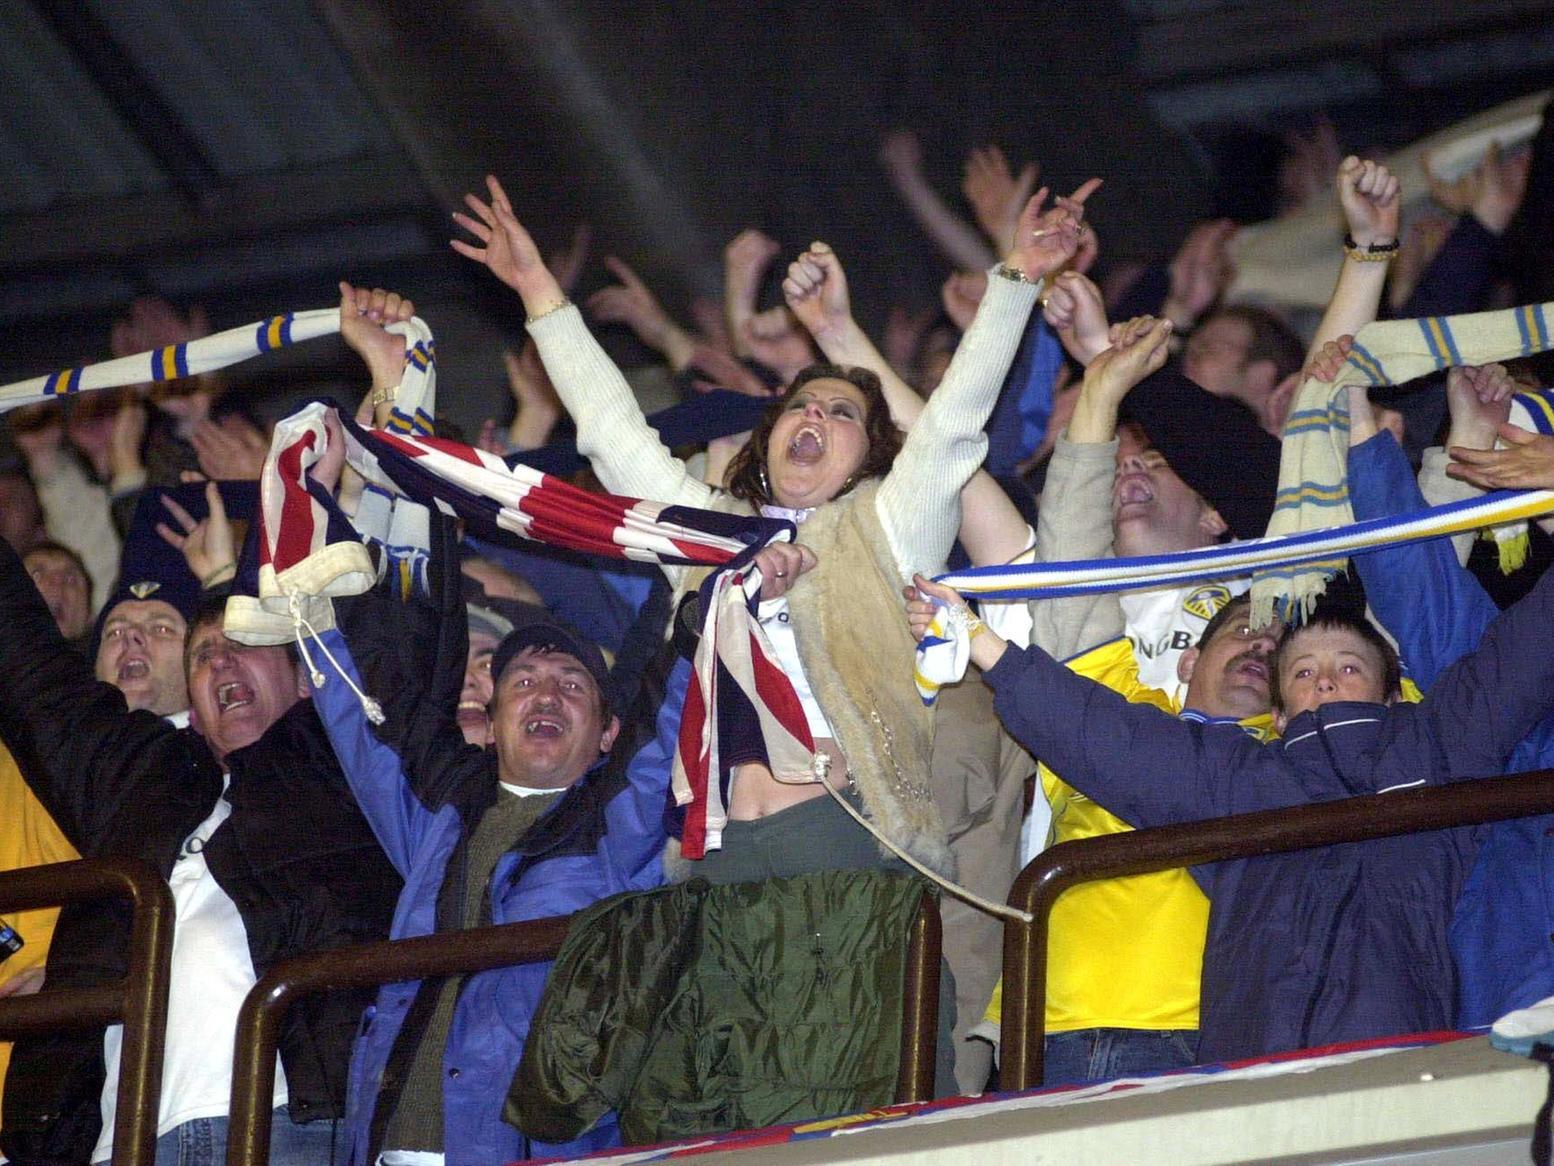 Leeds United fans celebrate Champions League victory against RSC Anderlecht at the Vanden Stock Stadium in Brussels.